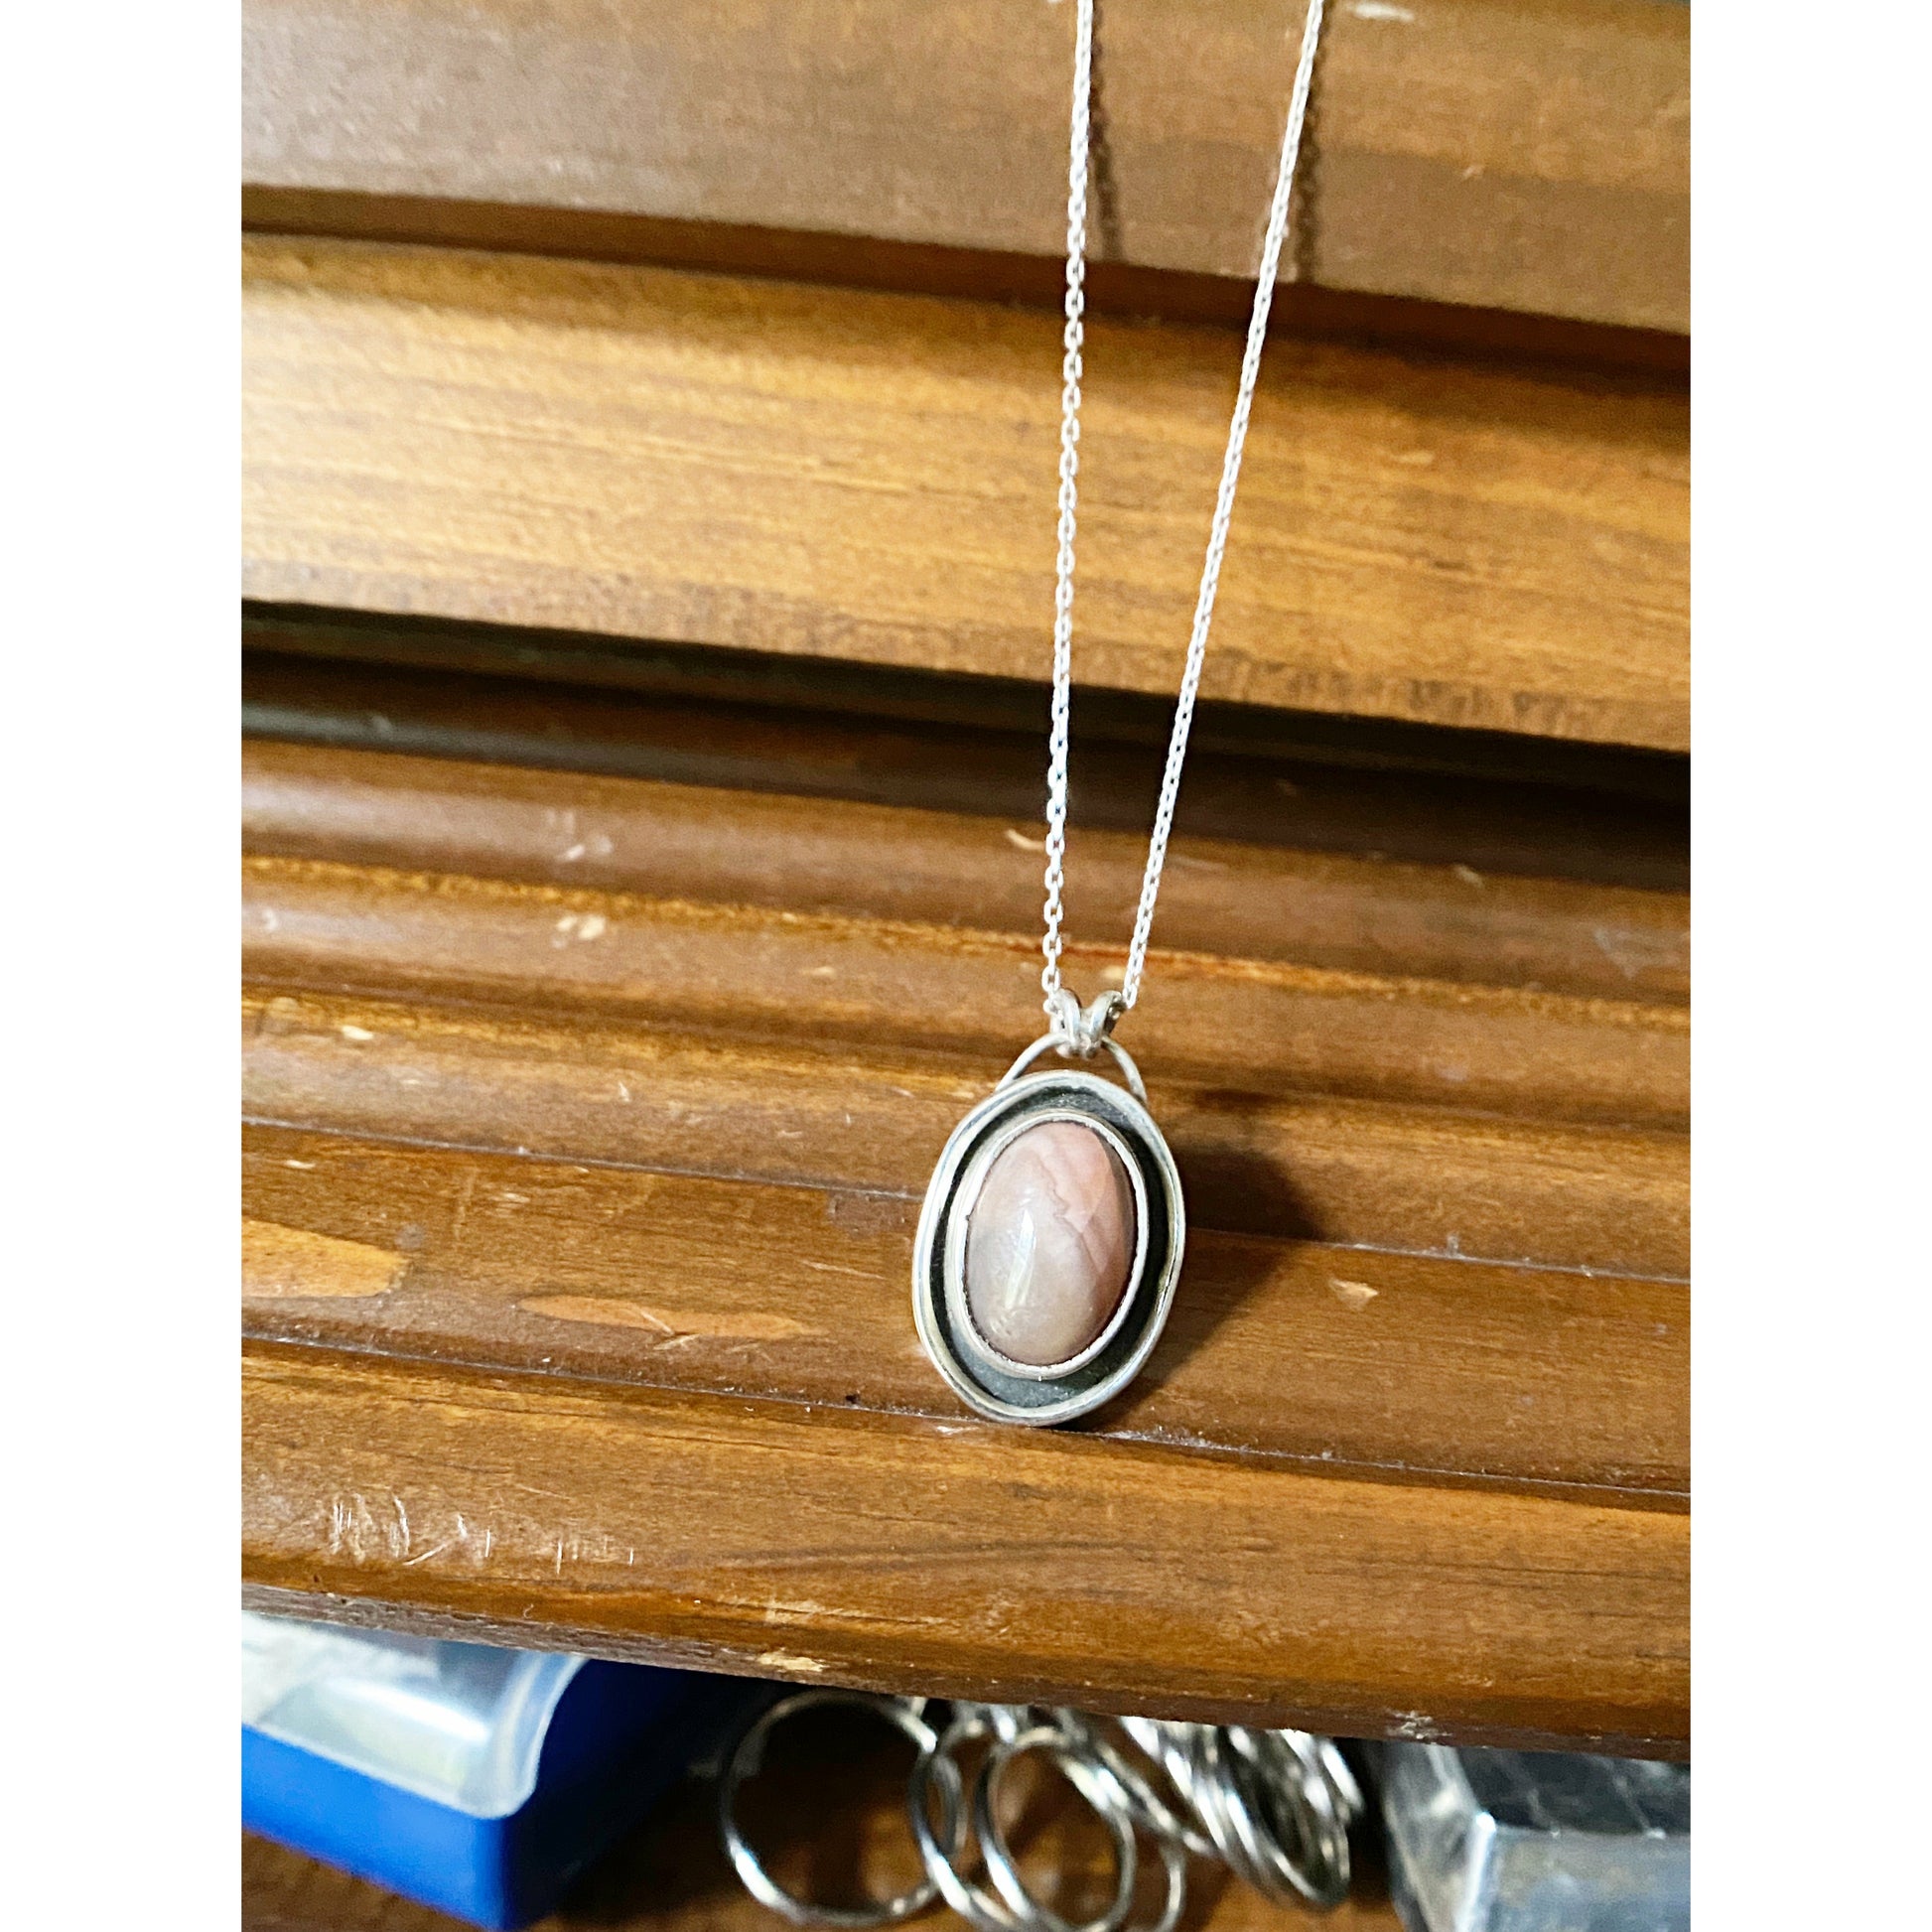 Oval pink stone with silver surround encircling stone, mounted on a 18 ich sterling silver necklace this is a choker style chain.